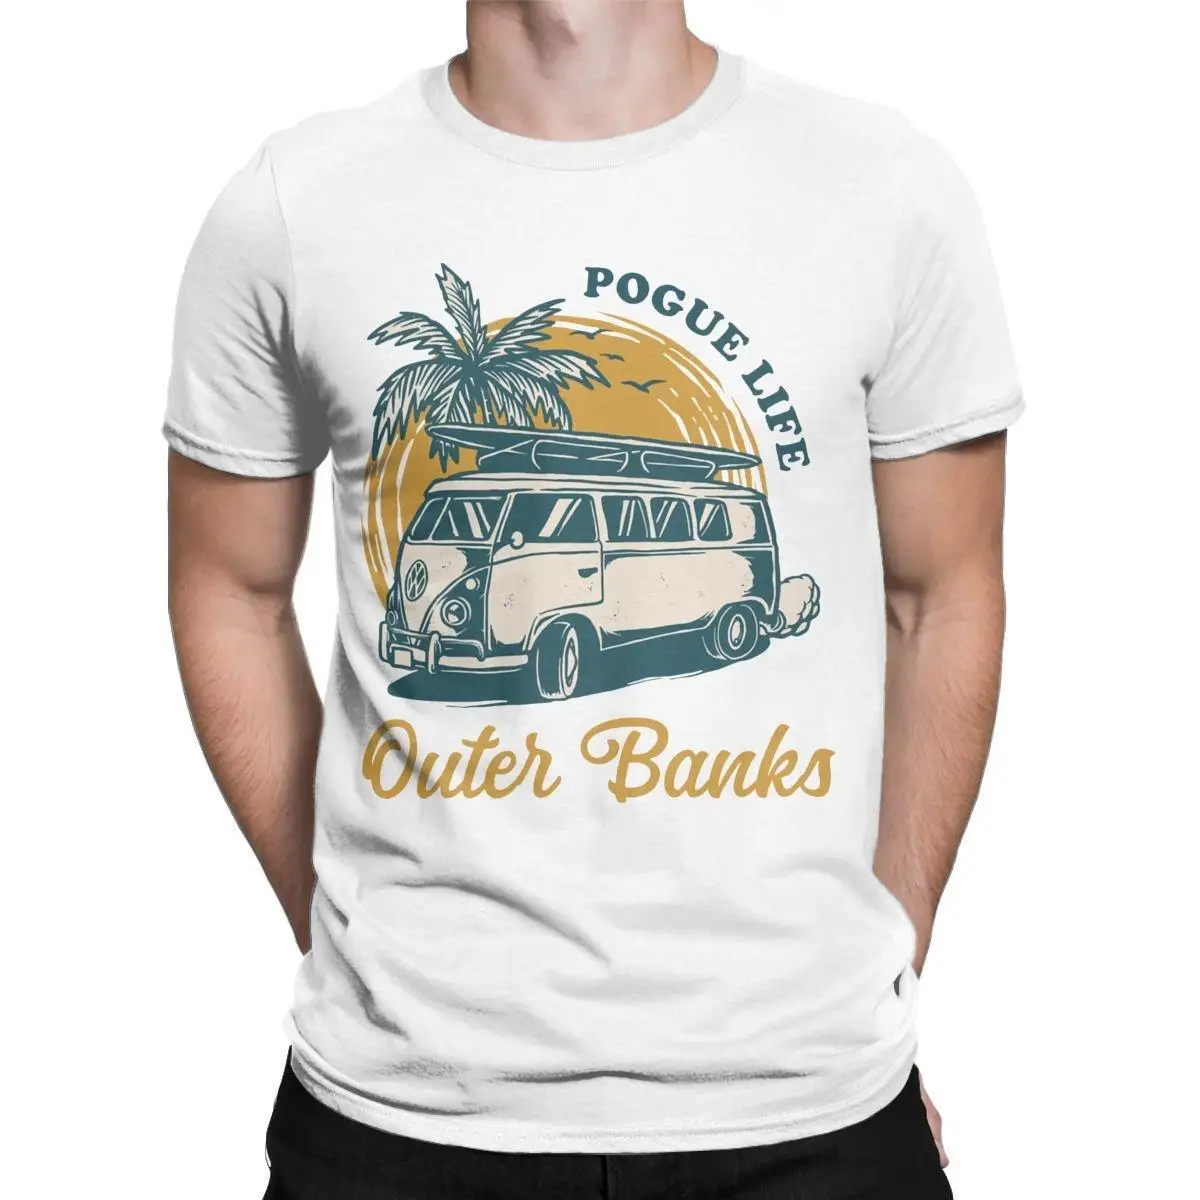 Outer Banks Pogue Life OBX Men T Shirts TV Show Tee Shirt Short Sleeve Round Collar T-Shirts Pure Cotton Plus Size Clothes